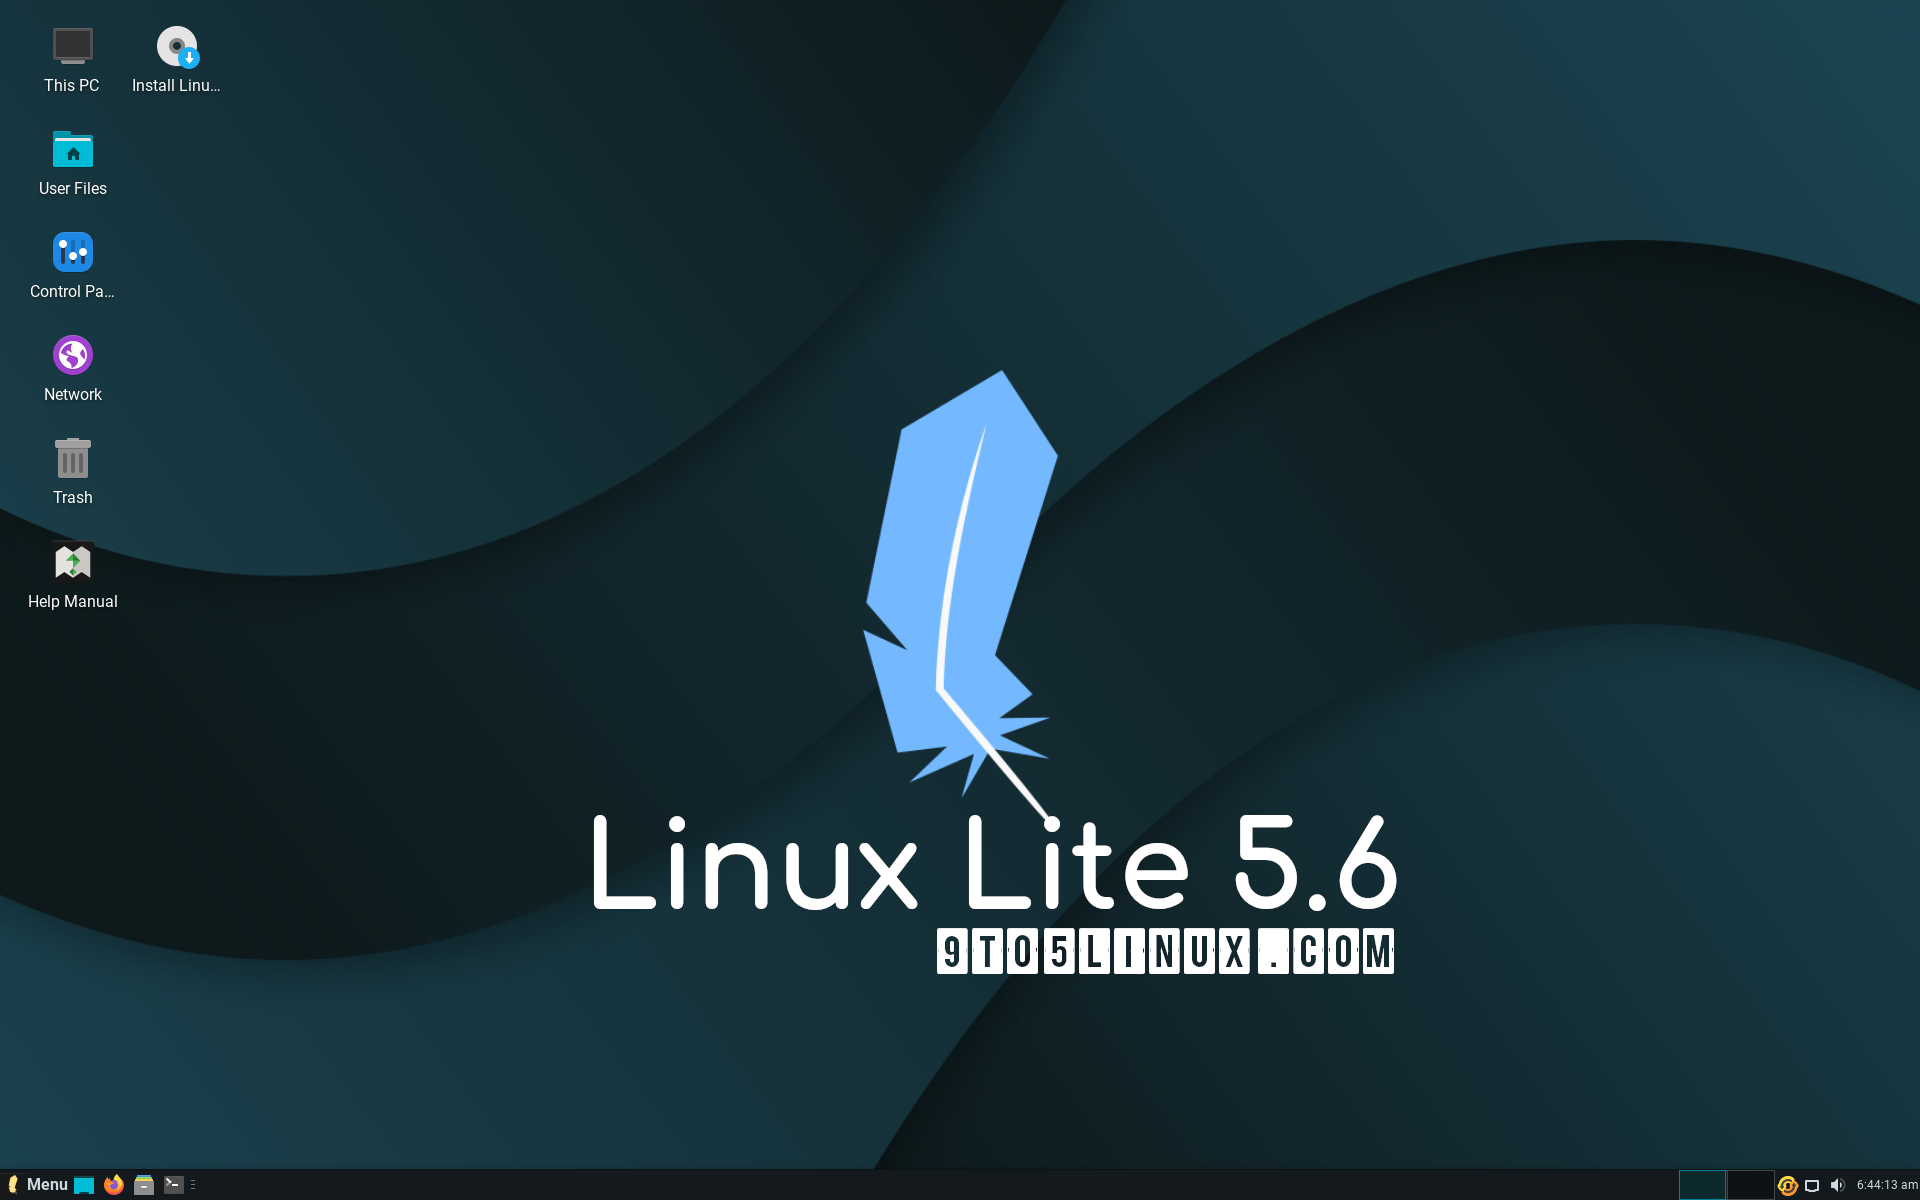 Ubuntu-Based Linux Lite 5.6 Released with ‘Pay What You Want’ Download Model